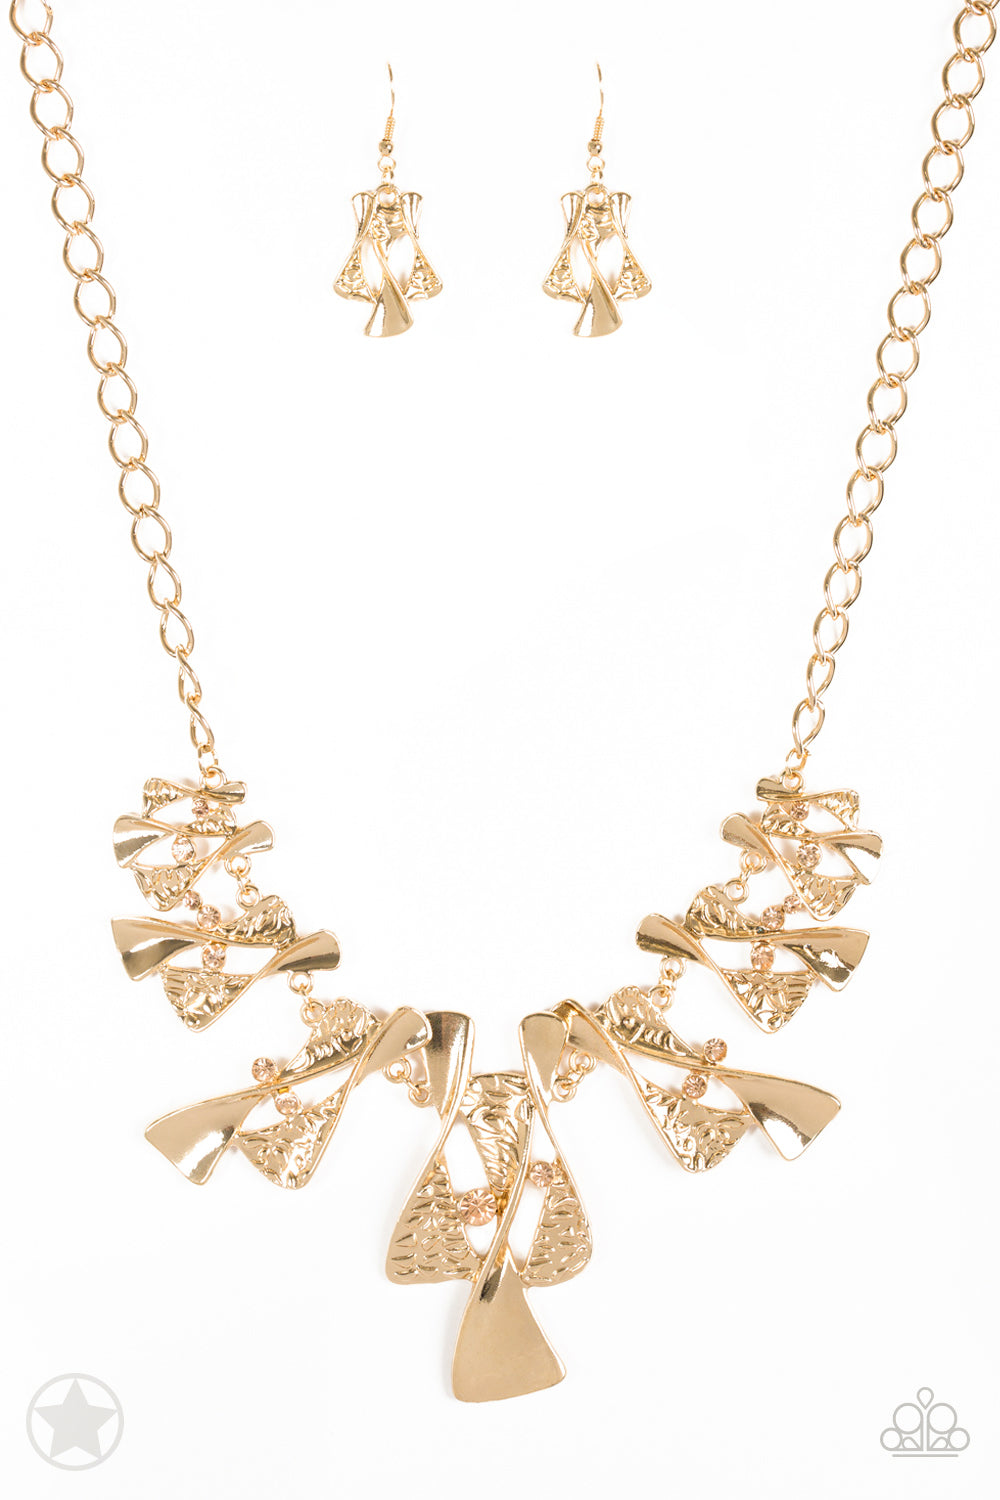 Paparazzi Necklace Blockbuster - The Sands of Time - Gold